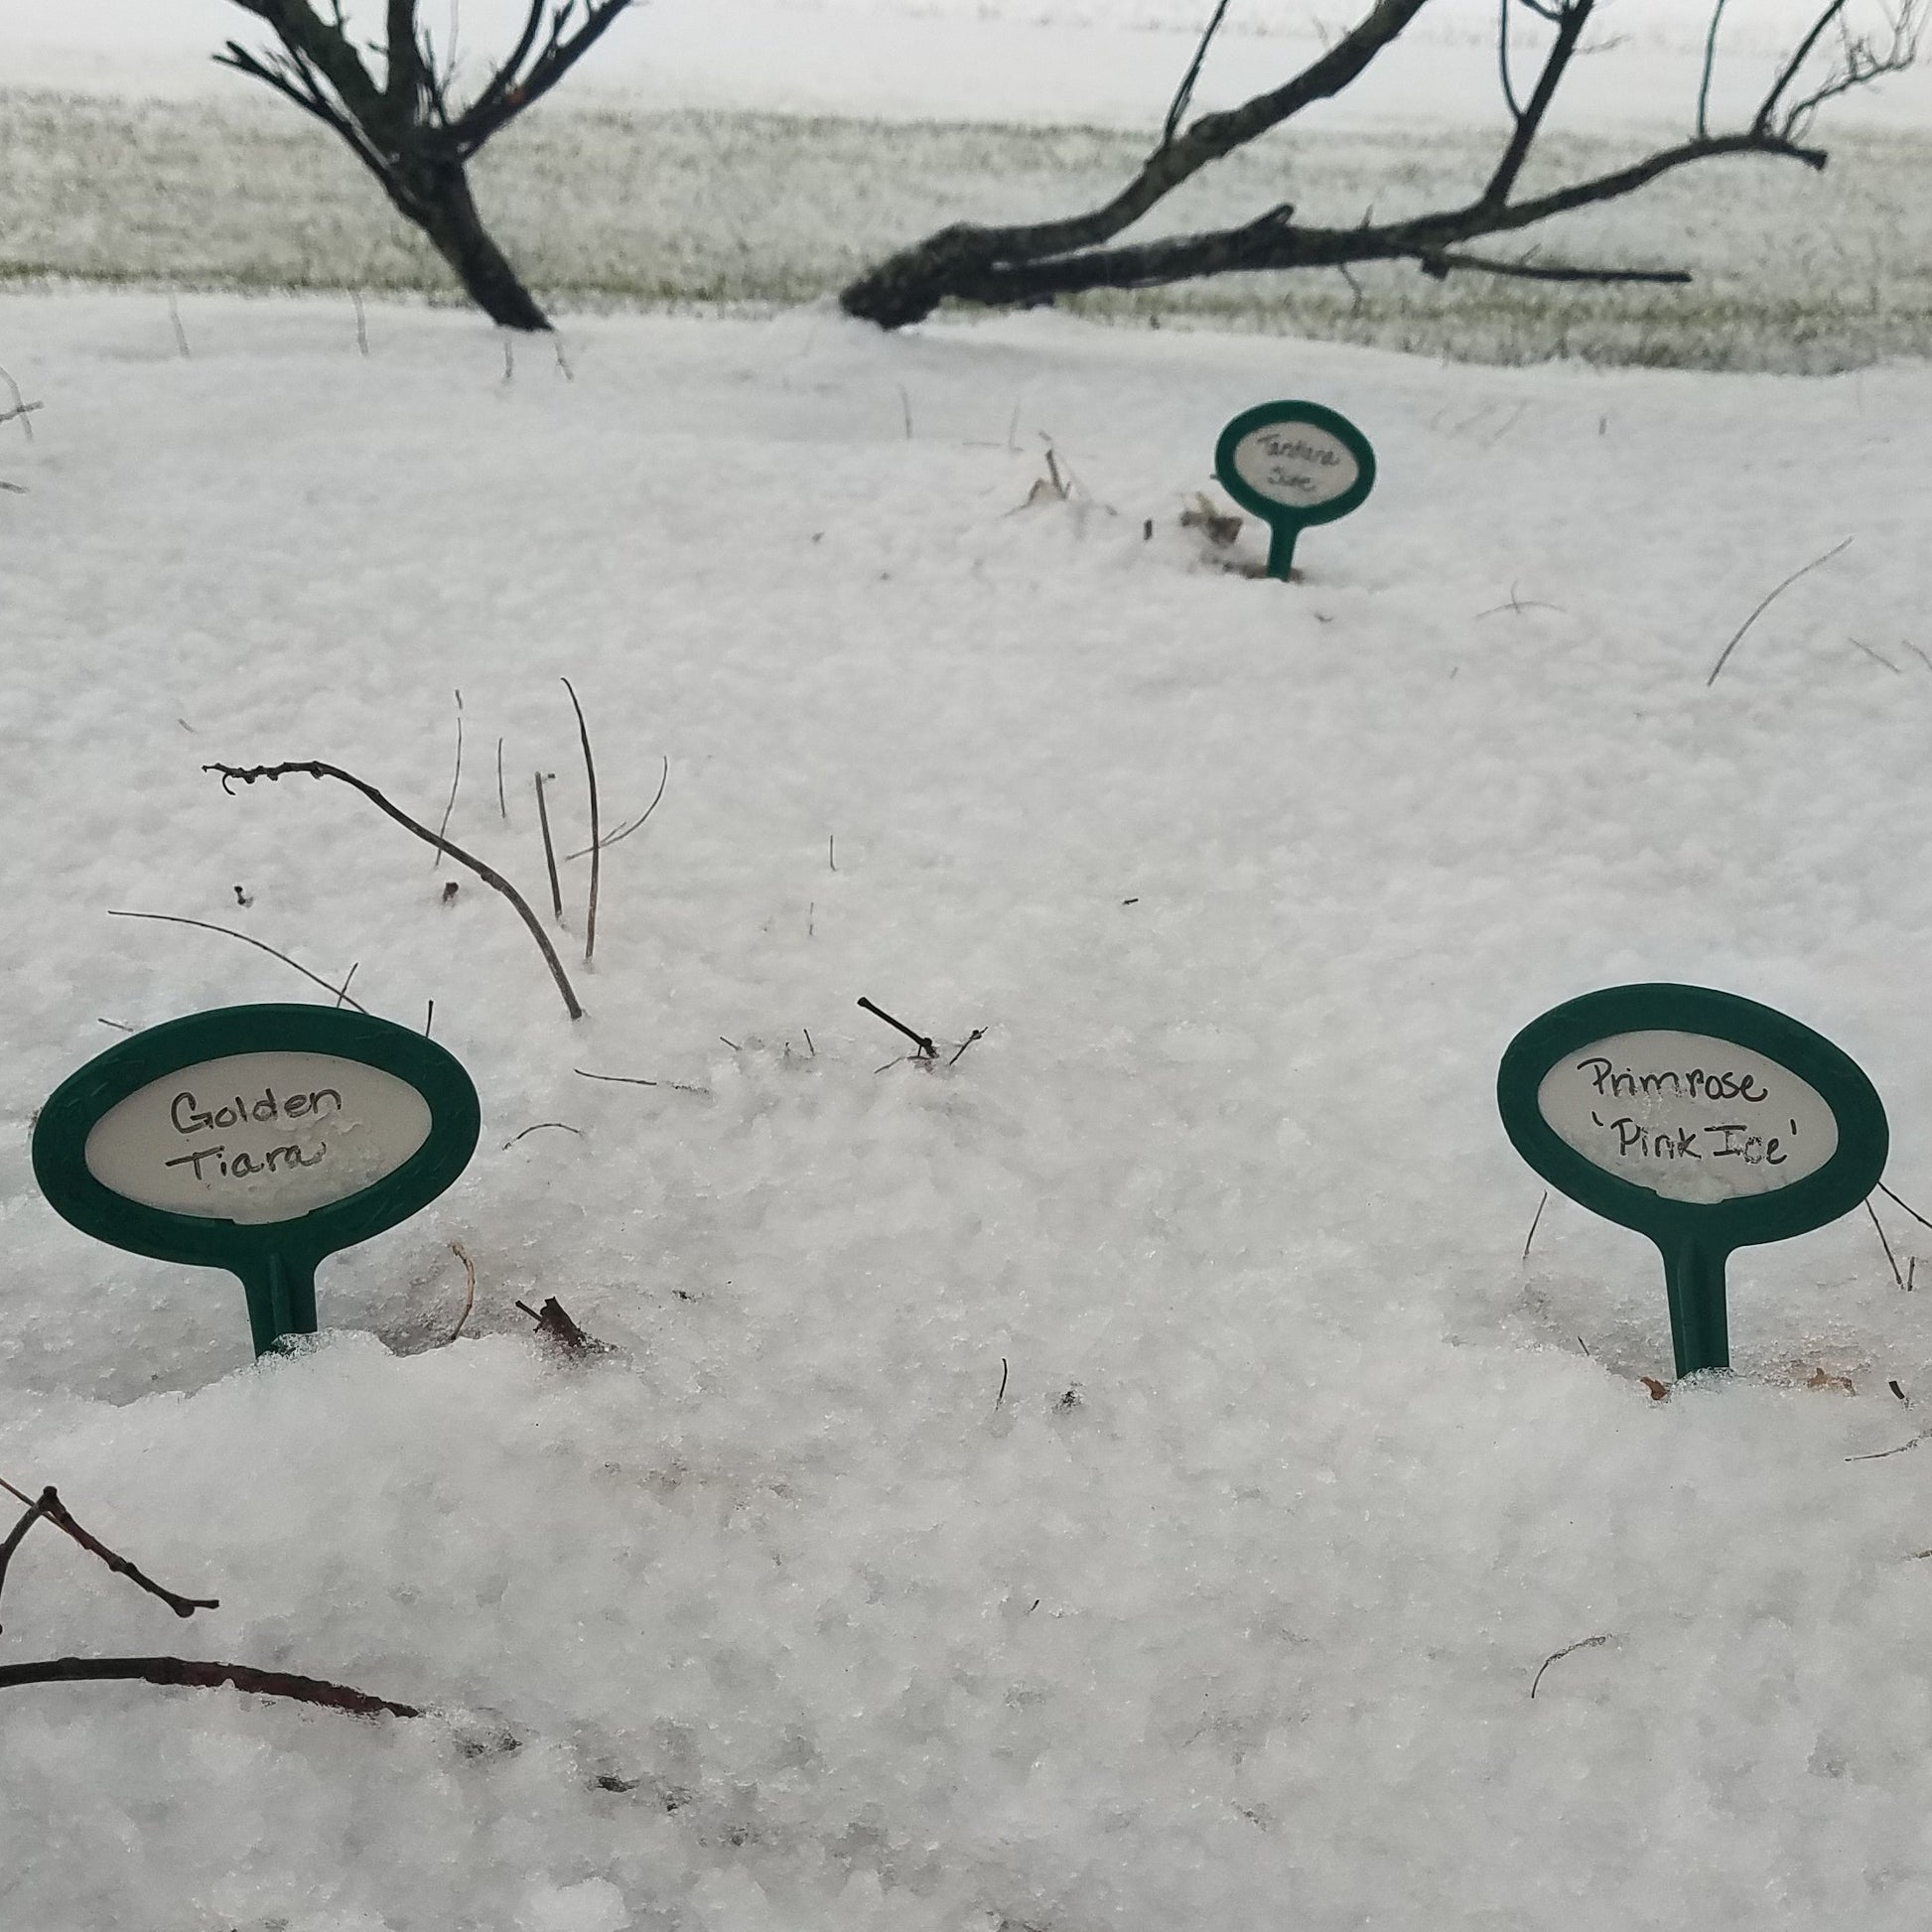 Writeable plant markers. 9 inch stake with vinyl insert. Photo shows plant markers in the snow.  